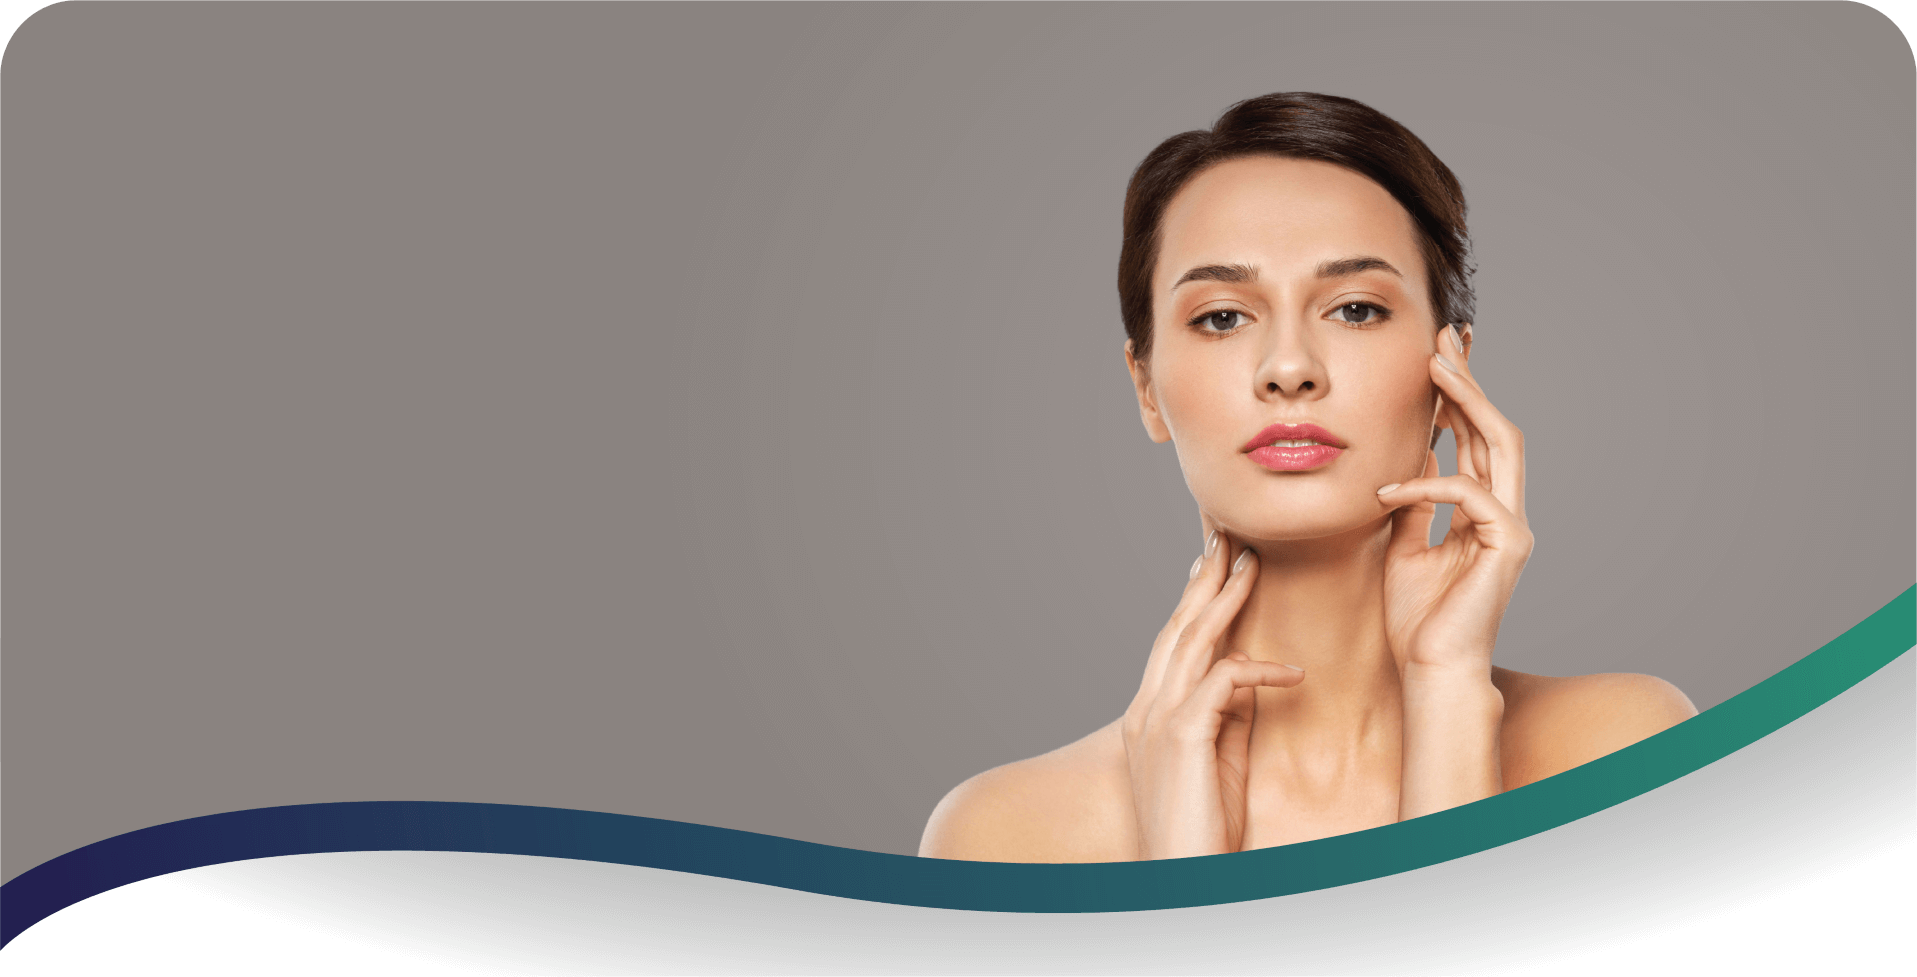 Dermatology services for women